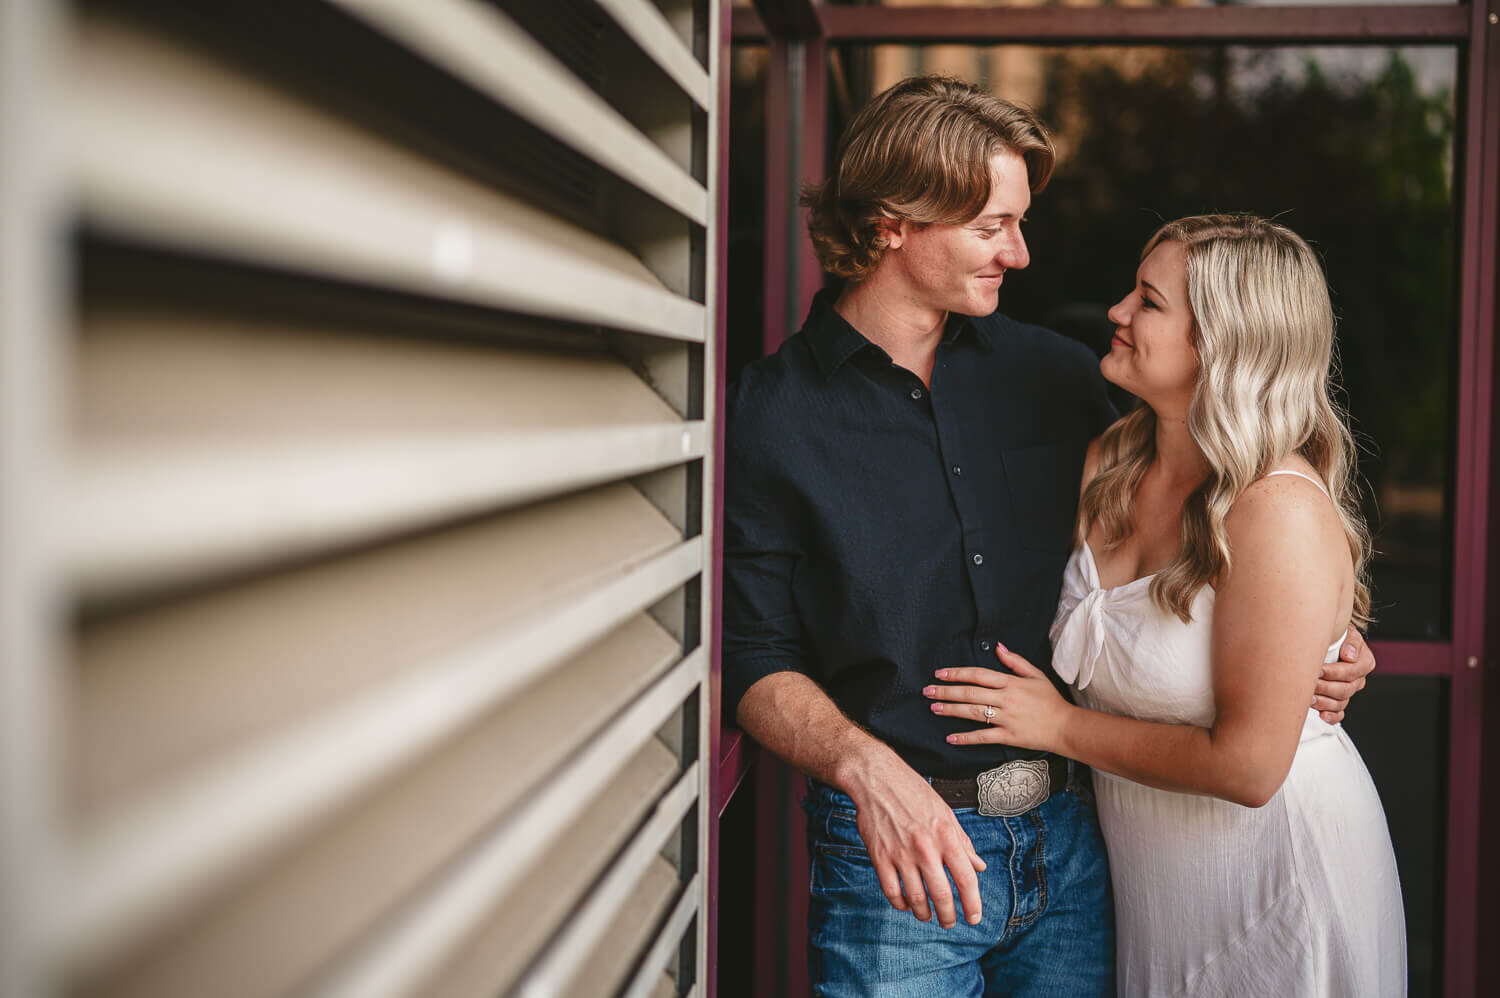 downtown peoria il engagement session-17.jpg